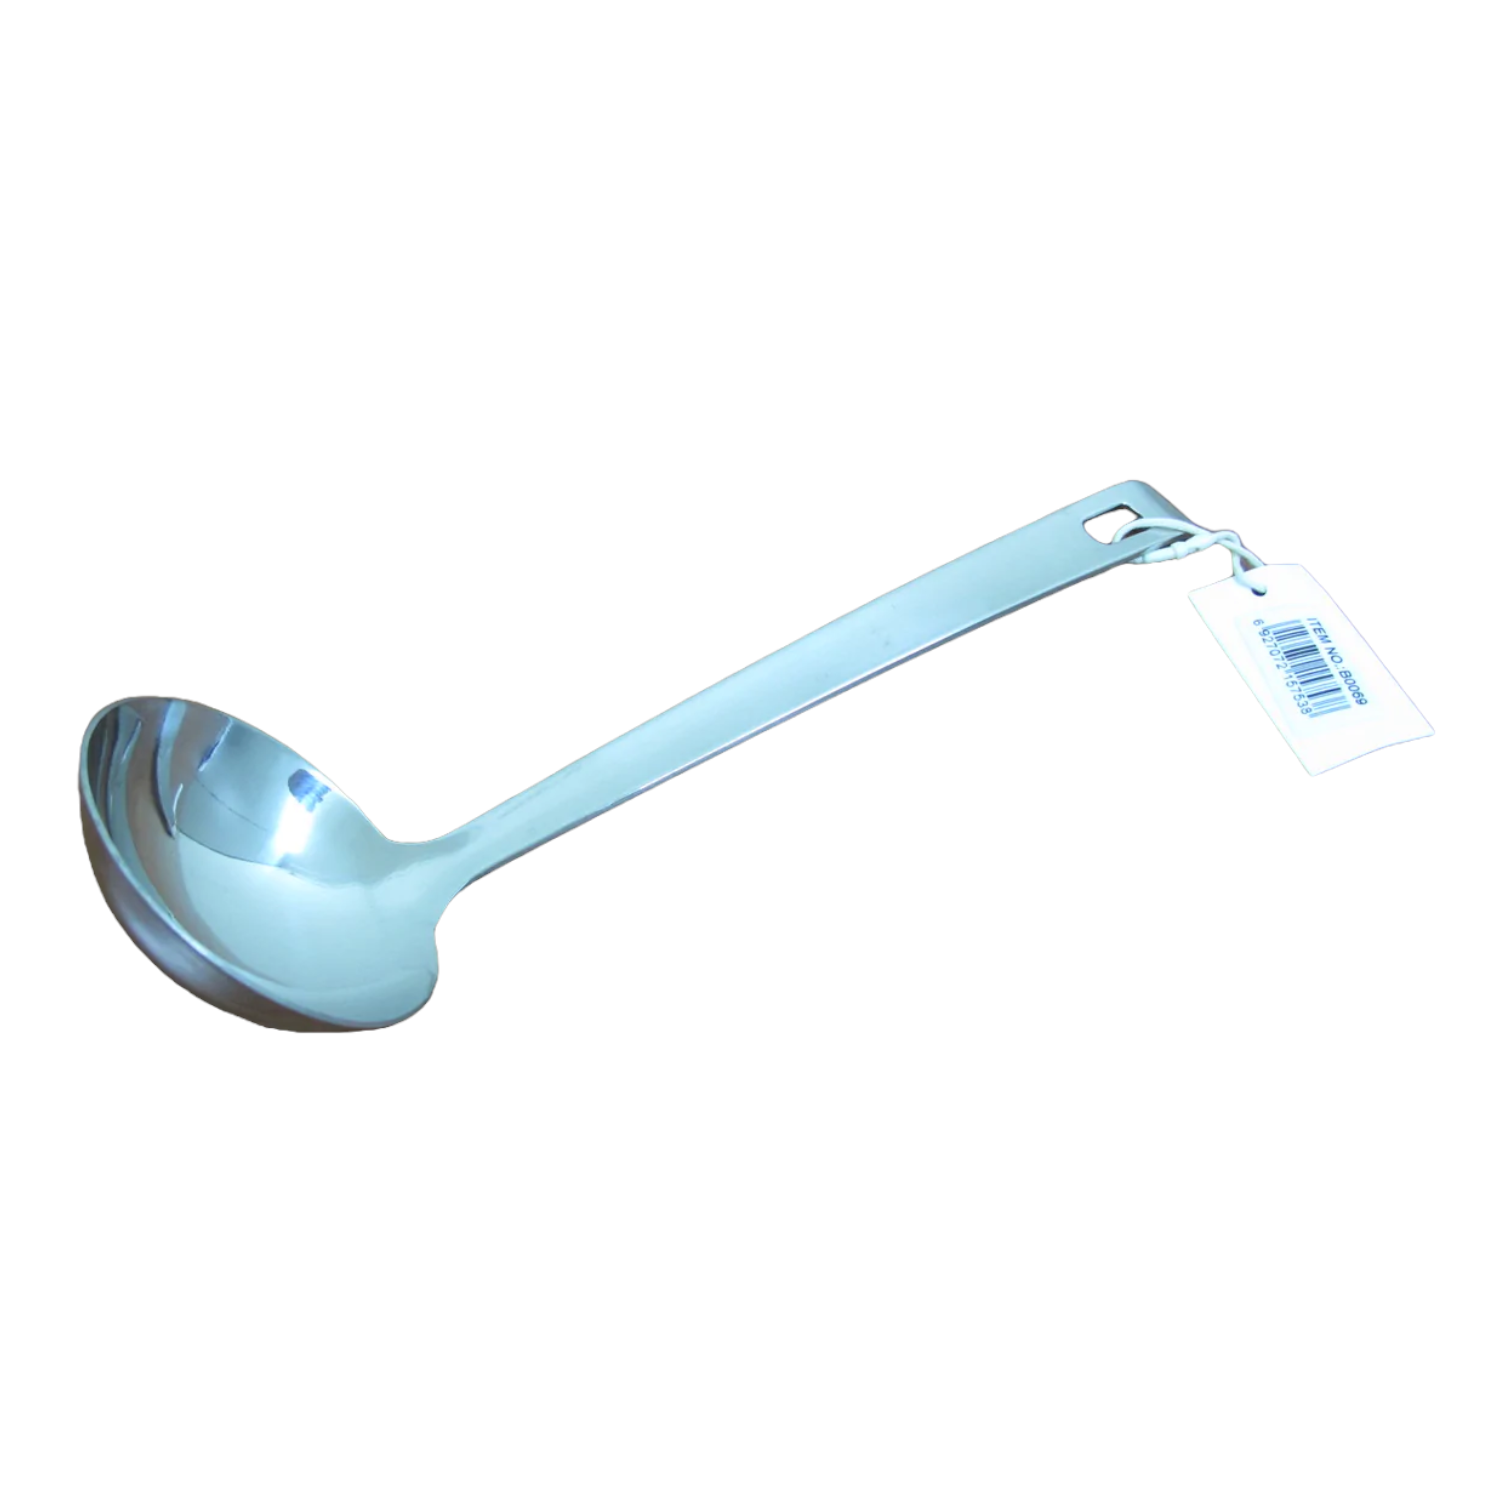 Small Stainless Steel Serving Laddle - Lunaz Shop